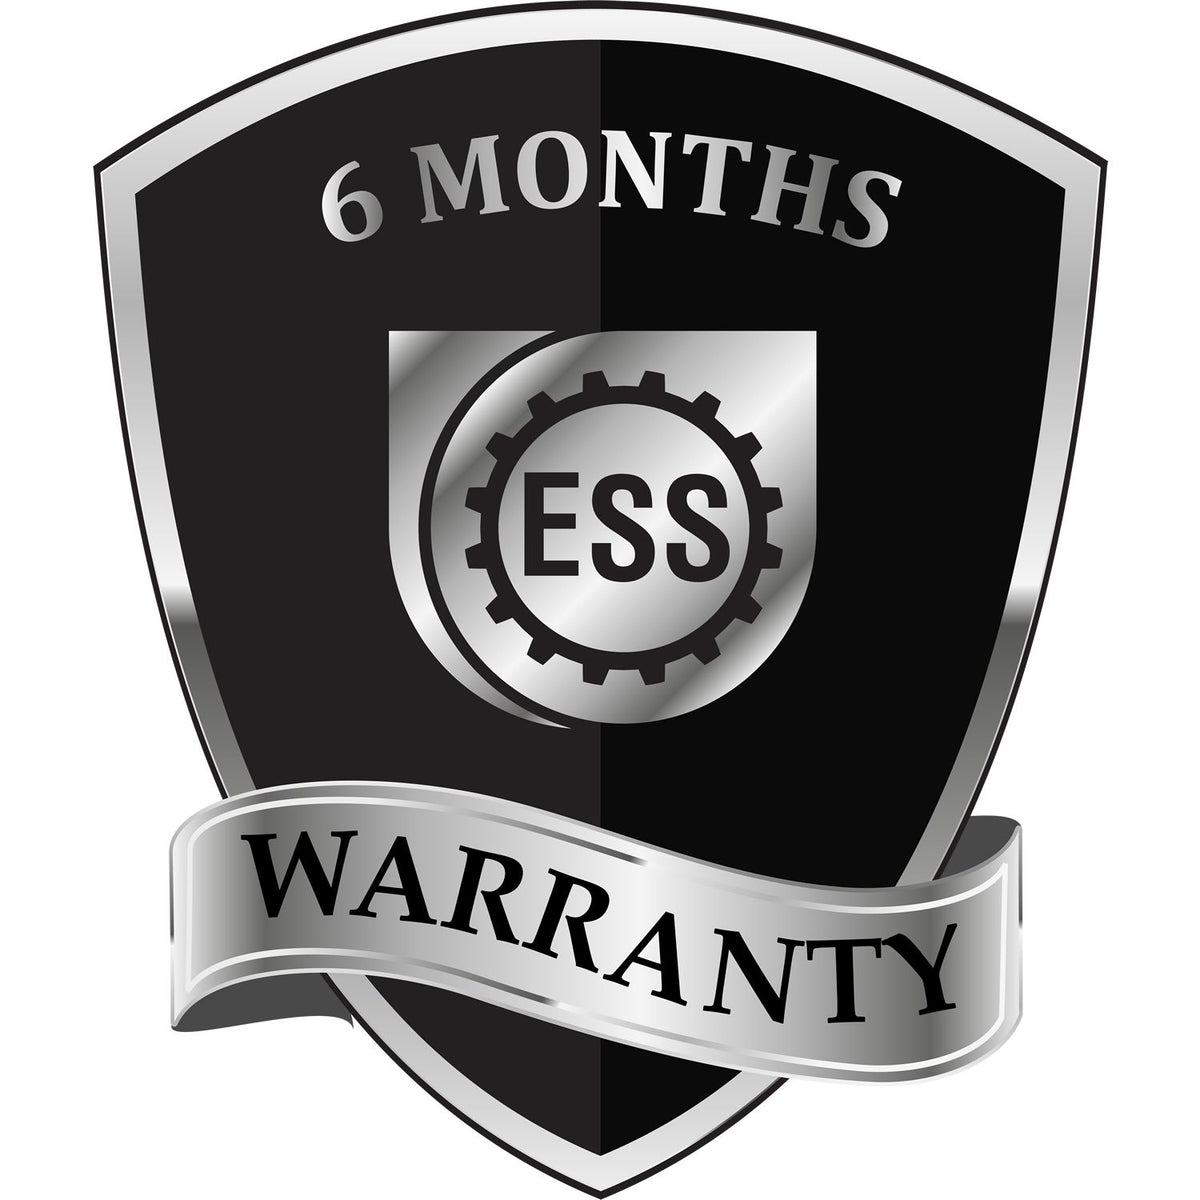 Way To Go Rubber Stamp 4373R 6 Month Warranty